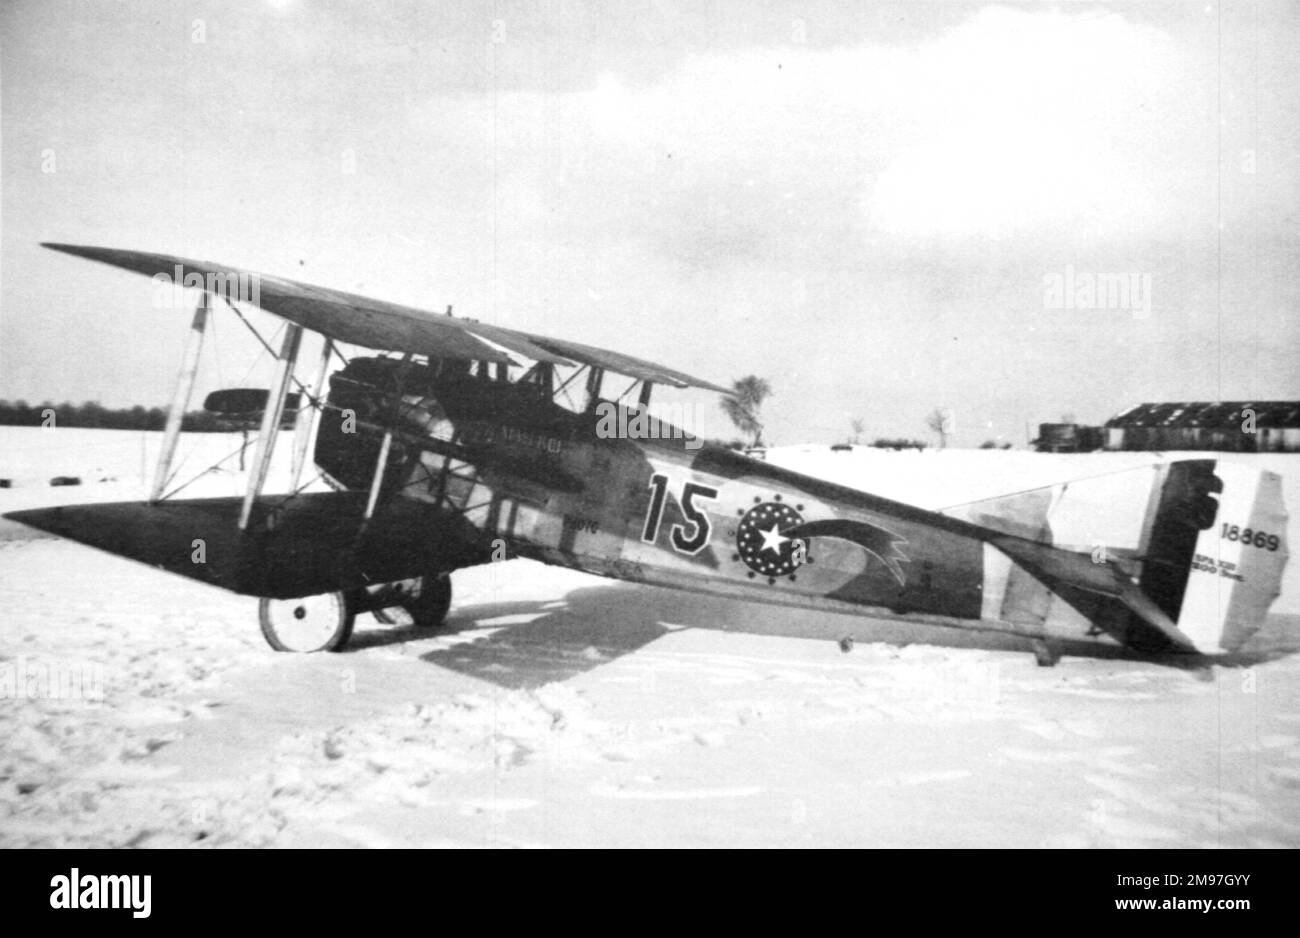 SPAD S XIII of US 22nd Aero Squadron, operational from August 1918.  The machines were shipped back to the USA after the war and used as fighter trainers. Seen here in a snow-covered field. Stock Photo